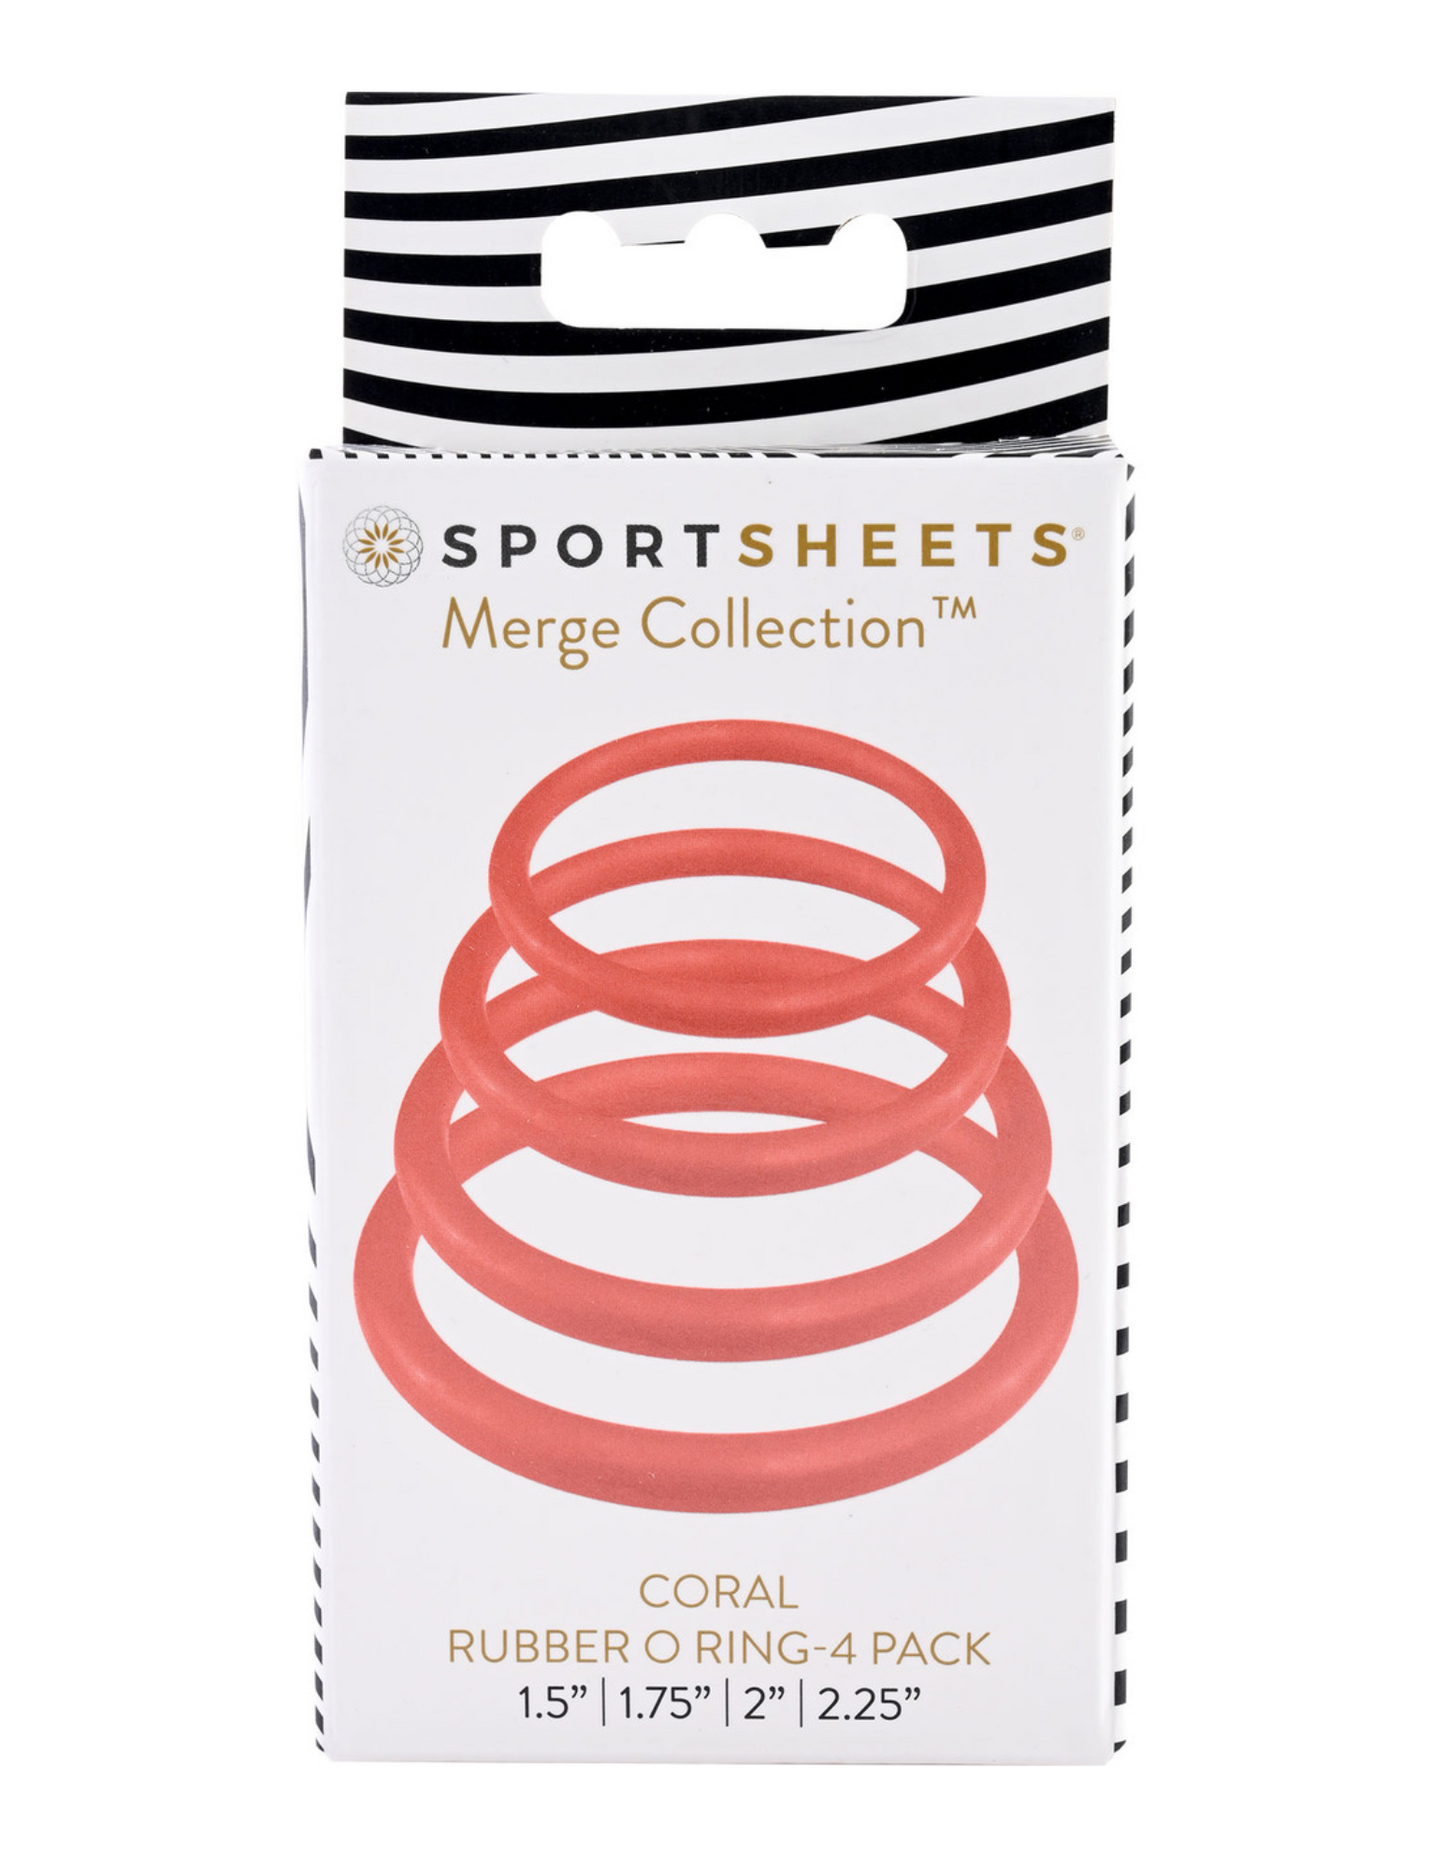 Photo of the box for the Merge Collection Rubber O-Ring (coral) from Sportsheets.